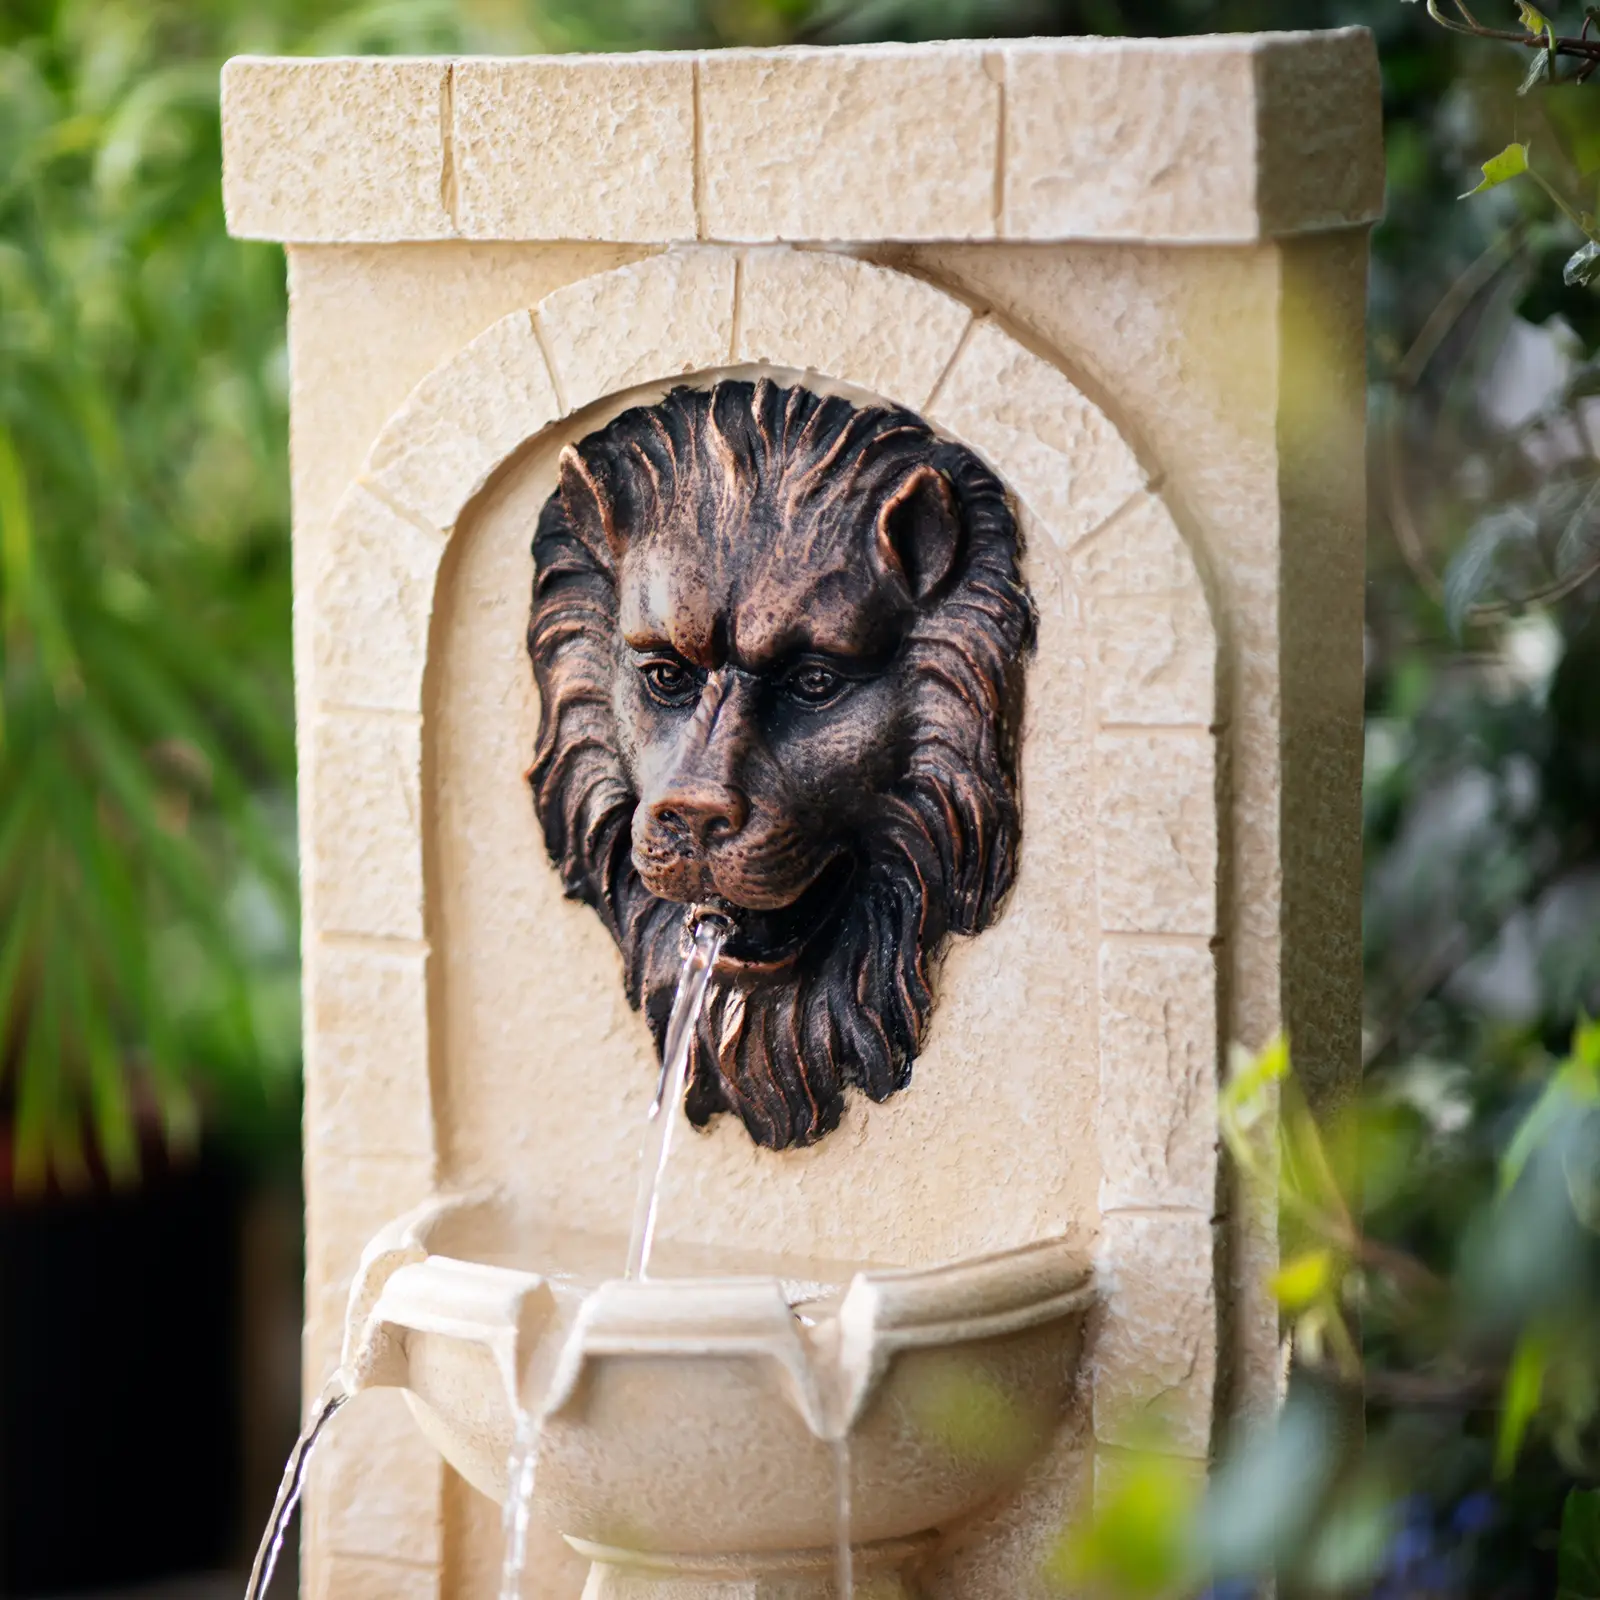 Solar Water Fountain - 2 levels with spouting lion head - LED lighting